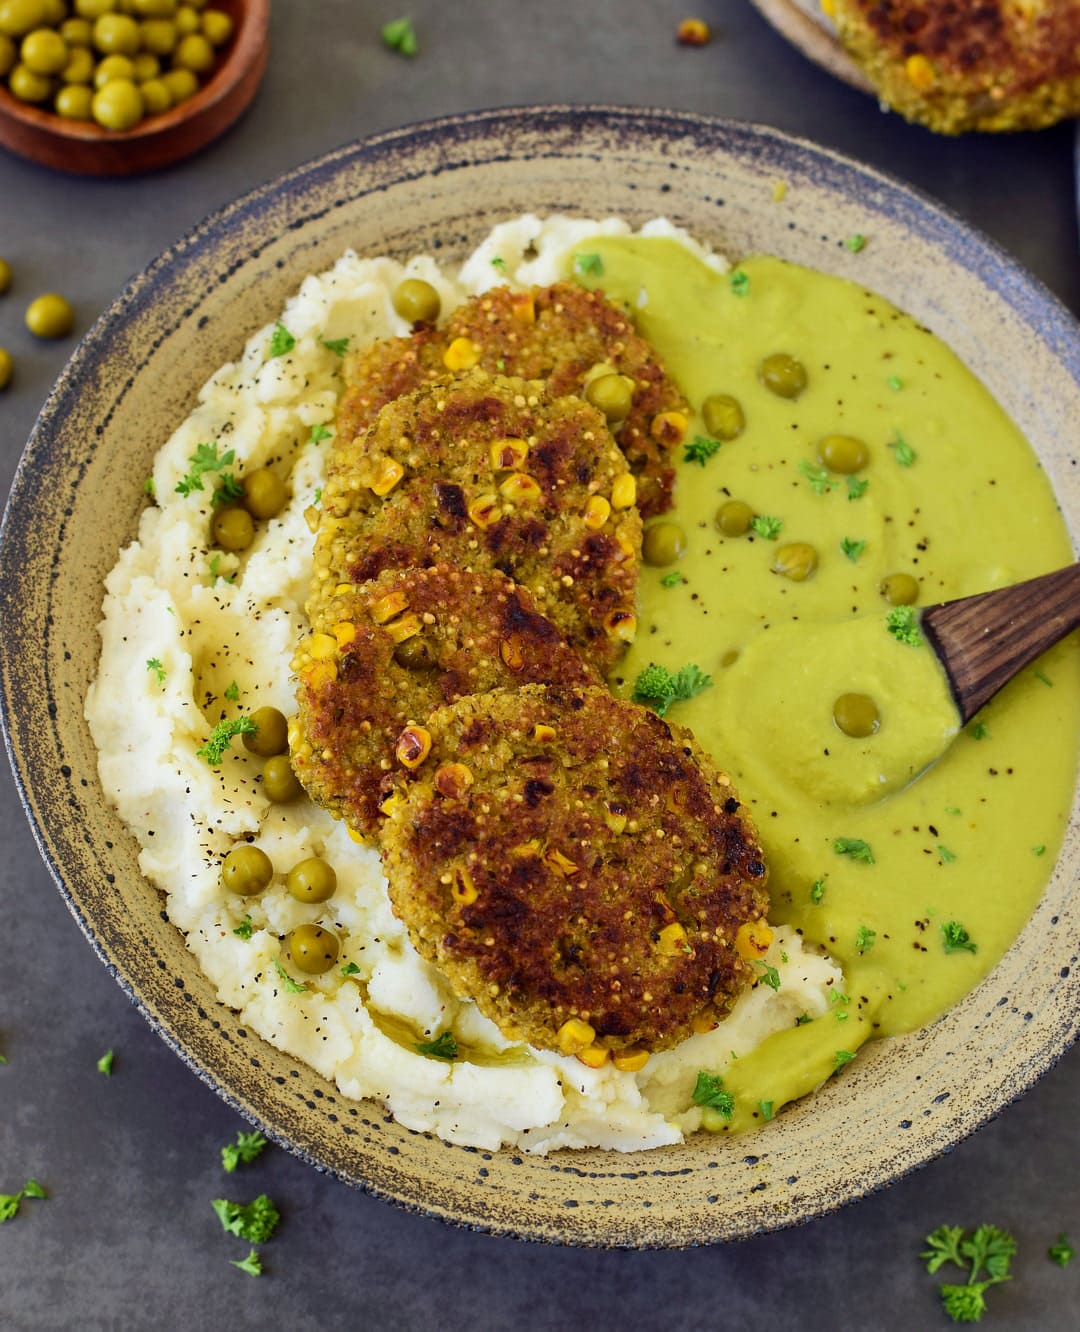 Millet fritters with mashed potatoes and a creamy pea sauce. This recipe is vegan, gluten-free, healthy and the perfect comfort food